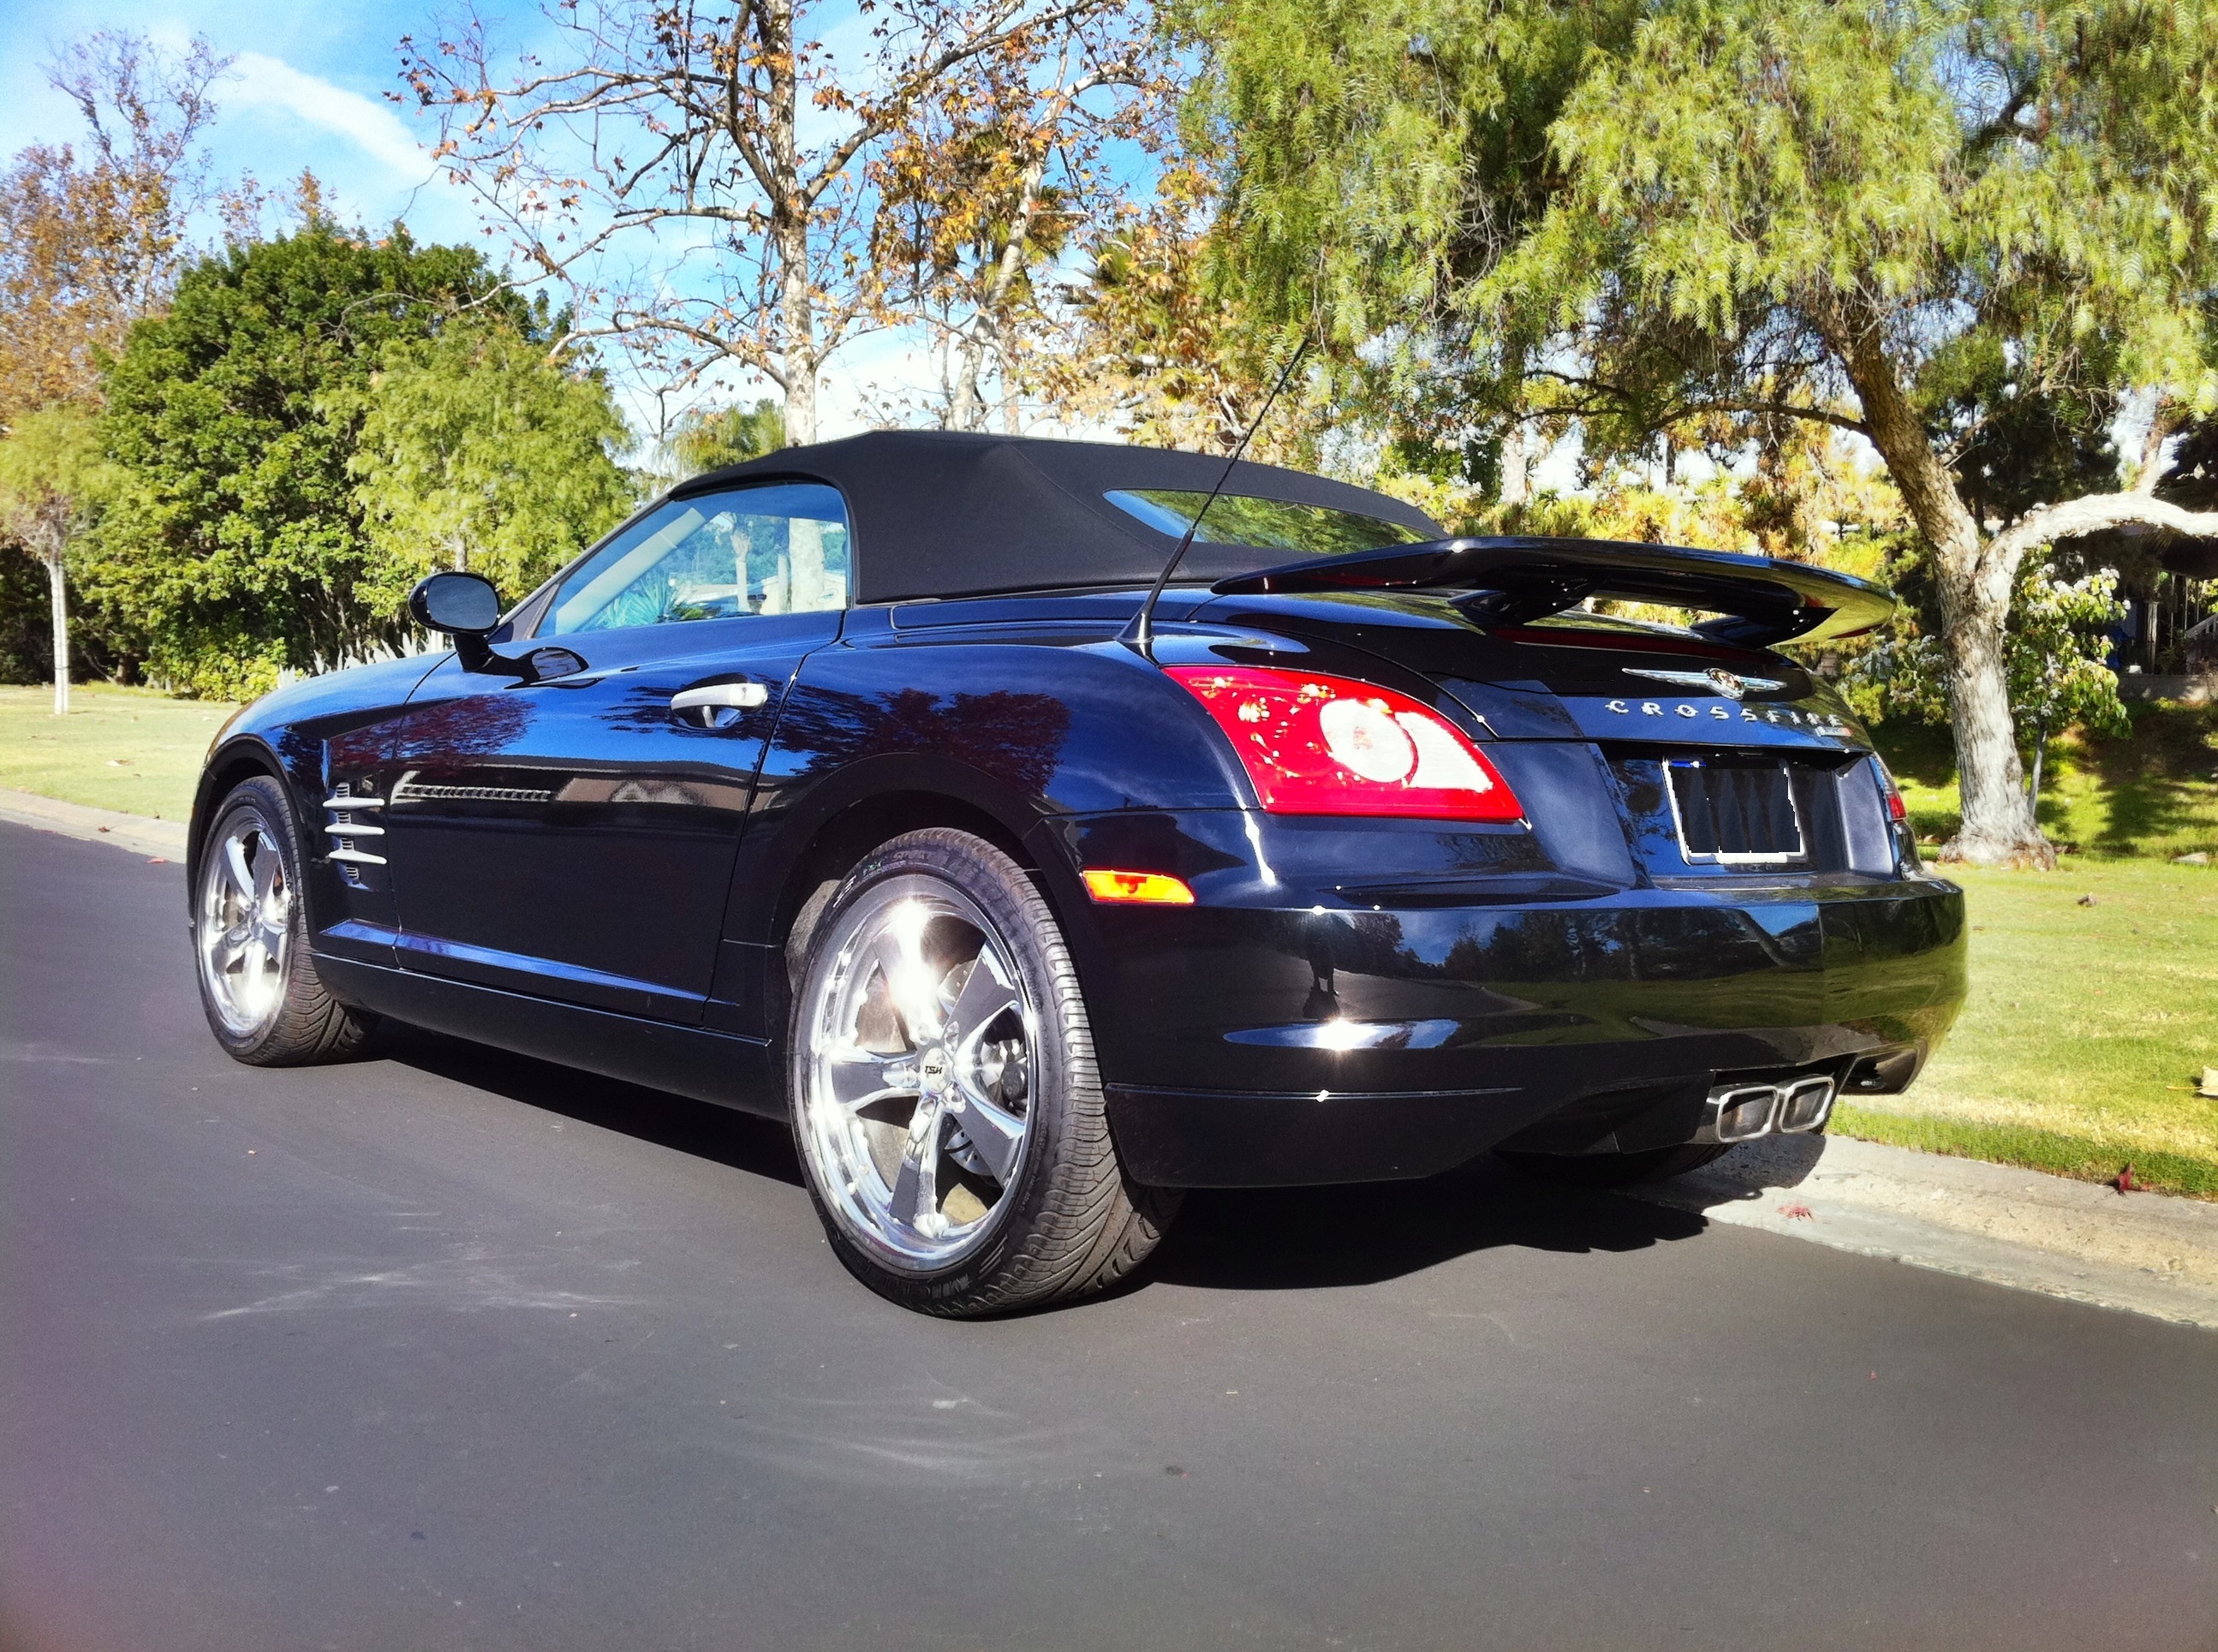 What happened to the chrysler crossfire #2